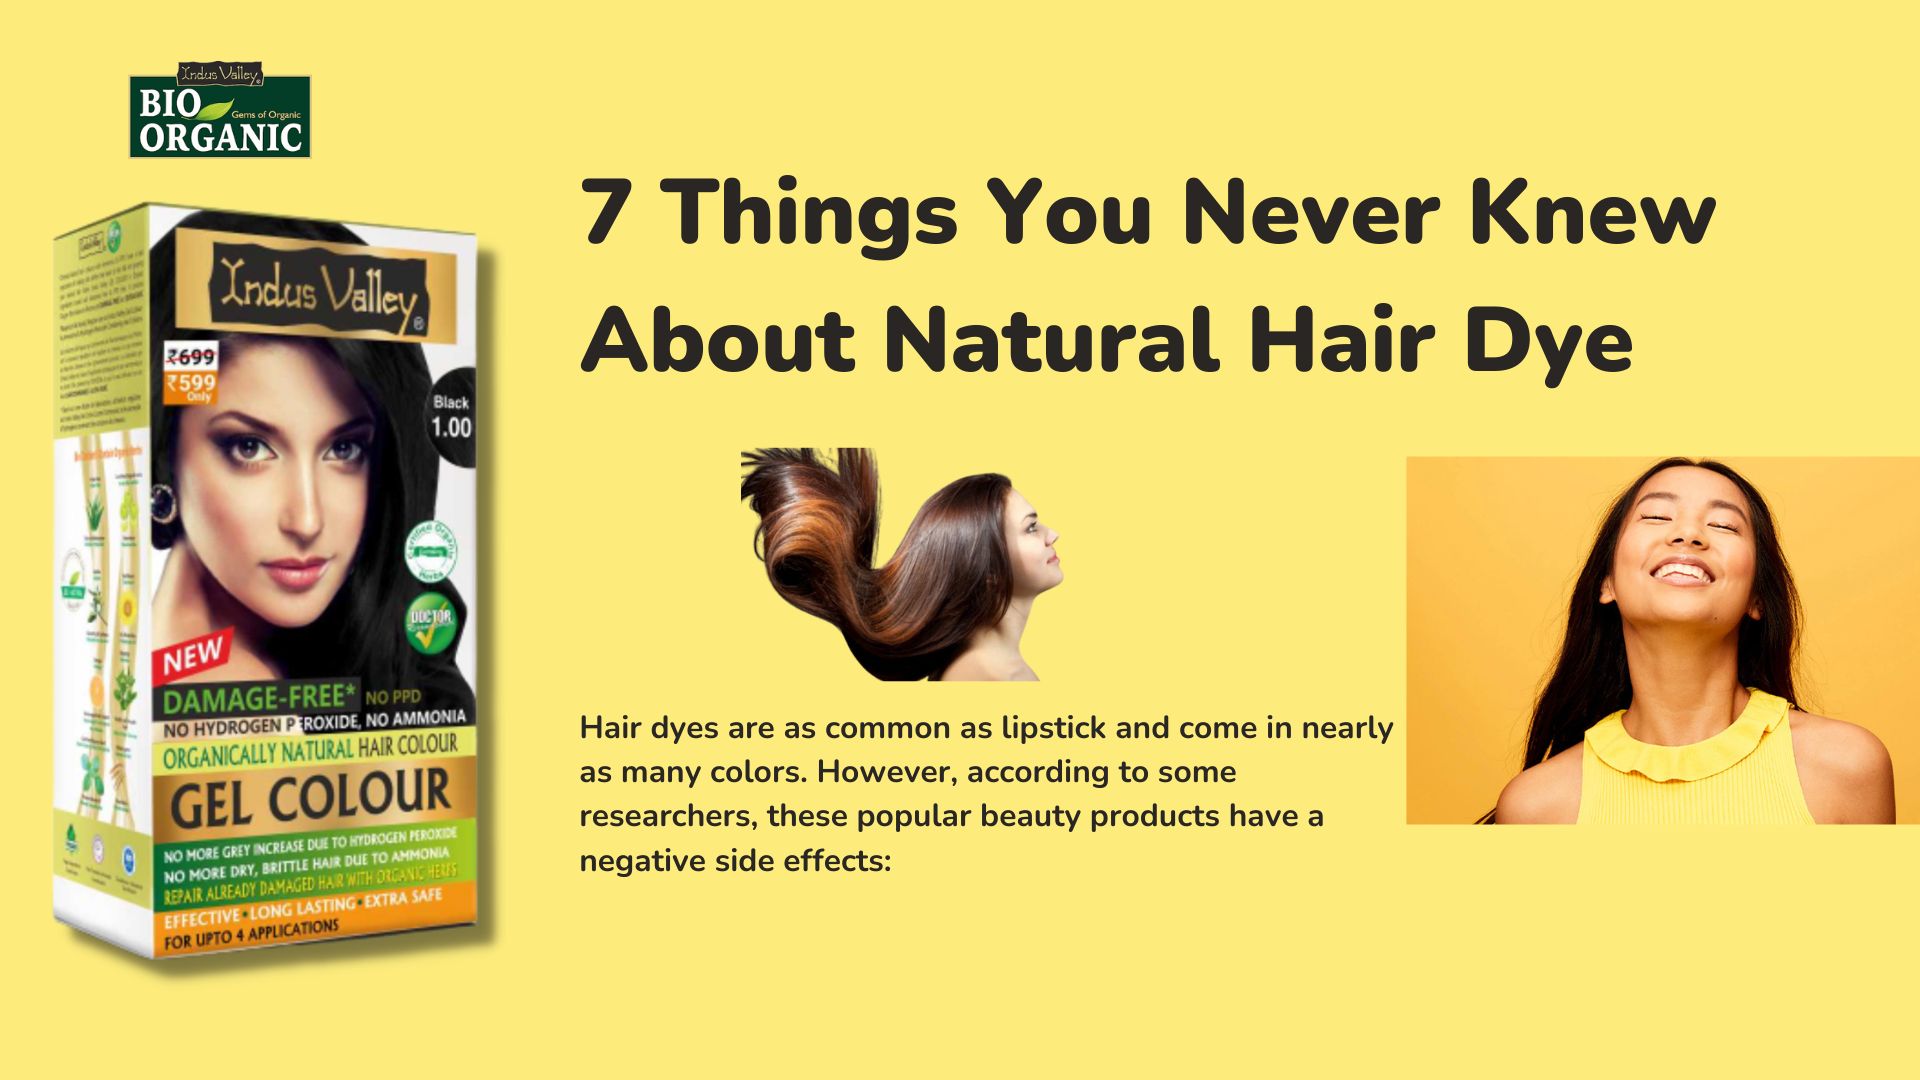 7 Things You Never Knew About Natural Hair Dye